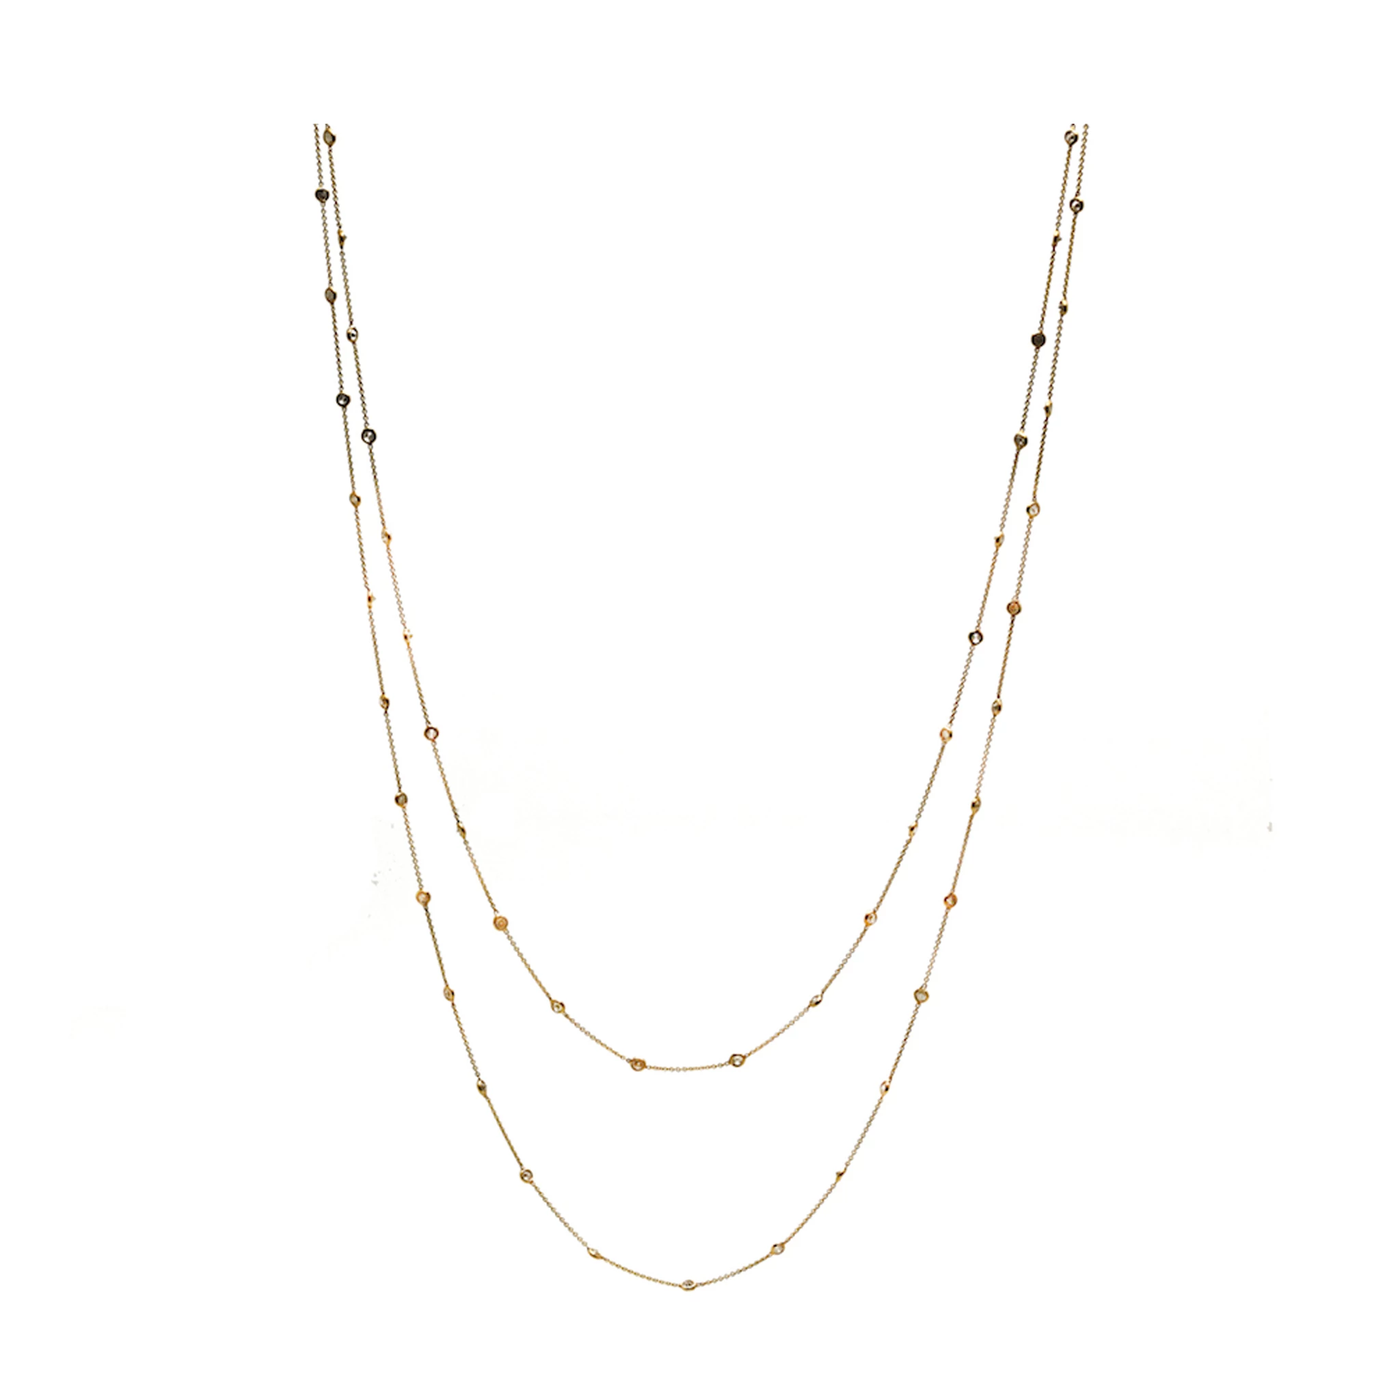 Diamond by the Yard Necklace in 18K Gold